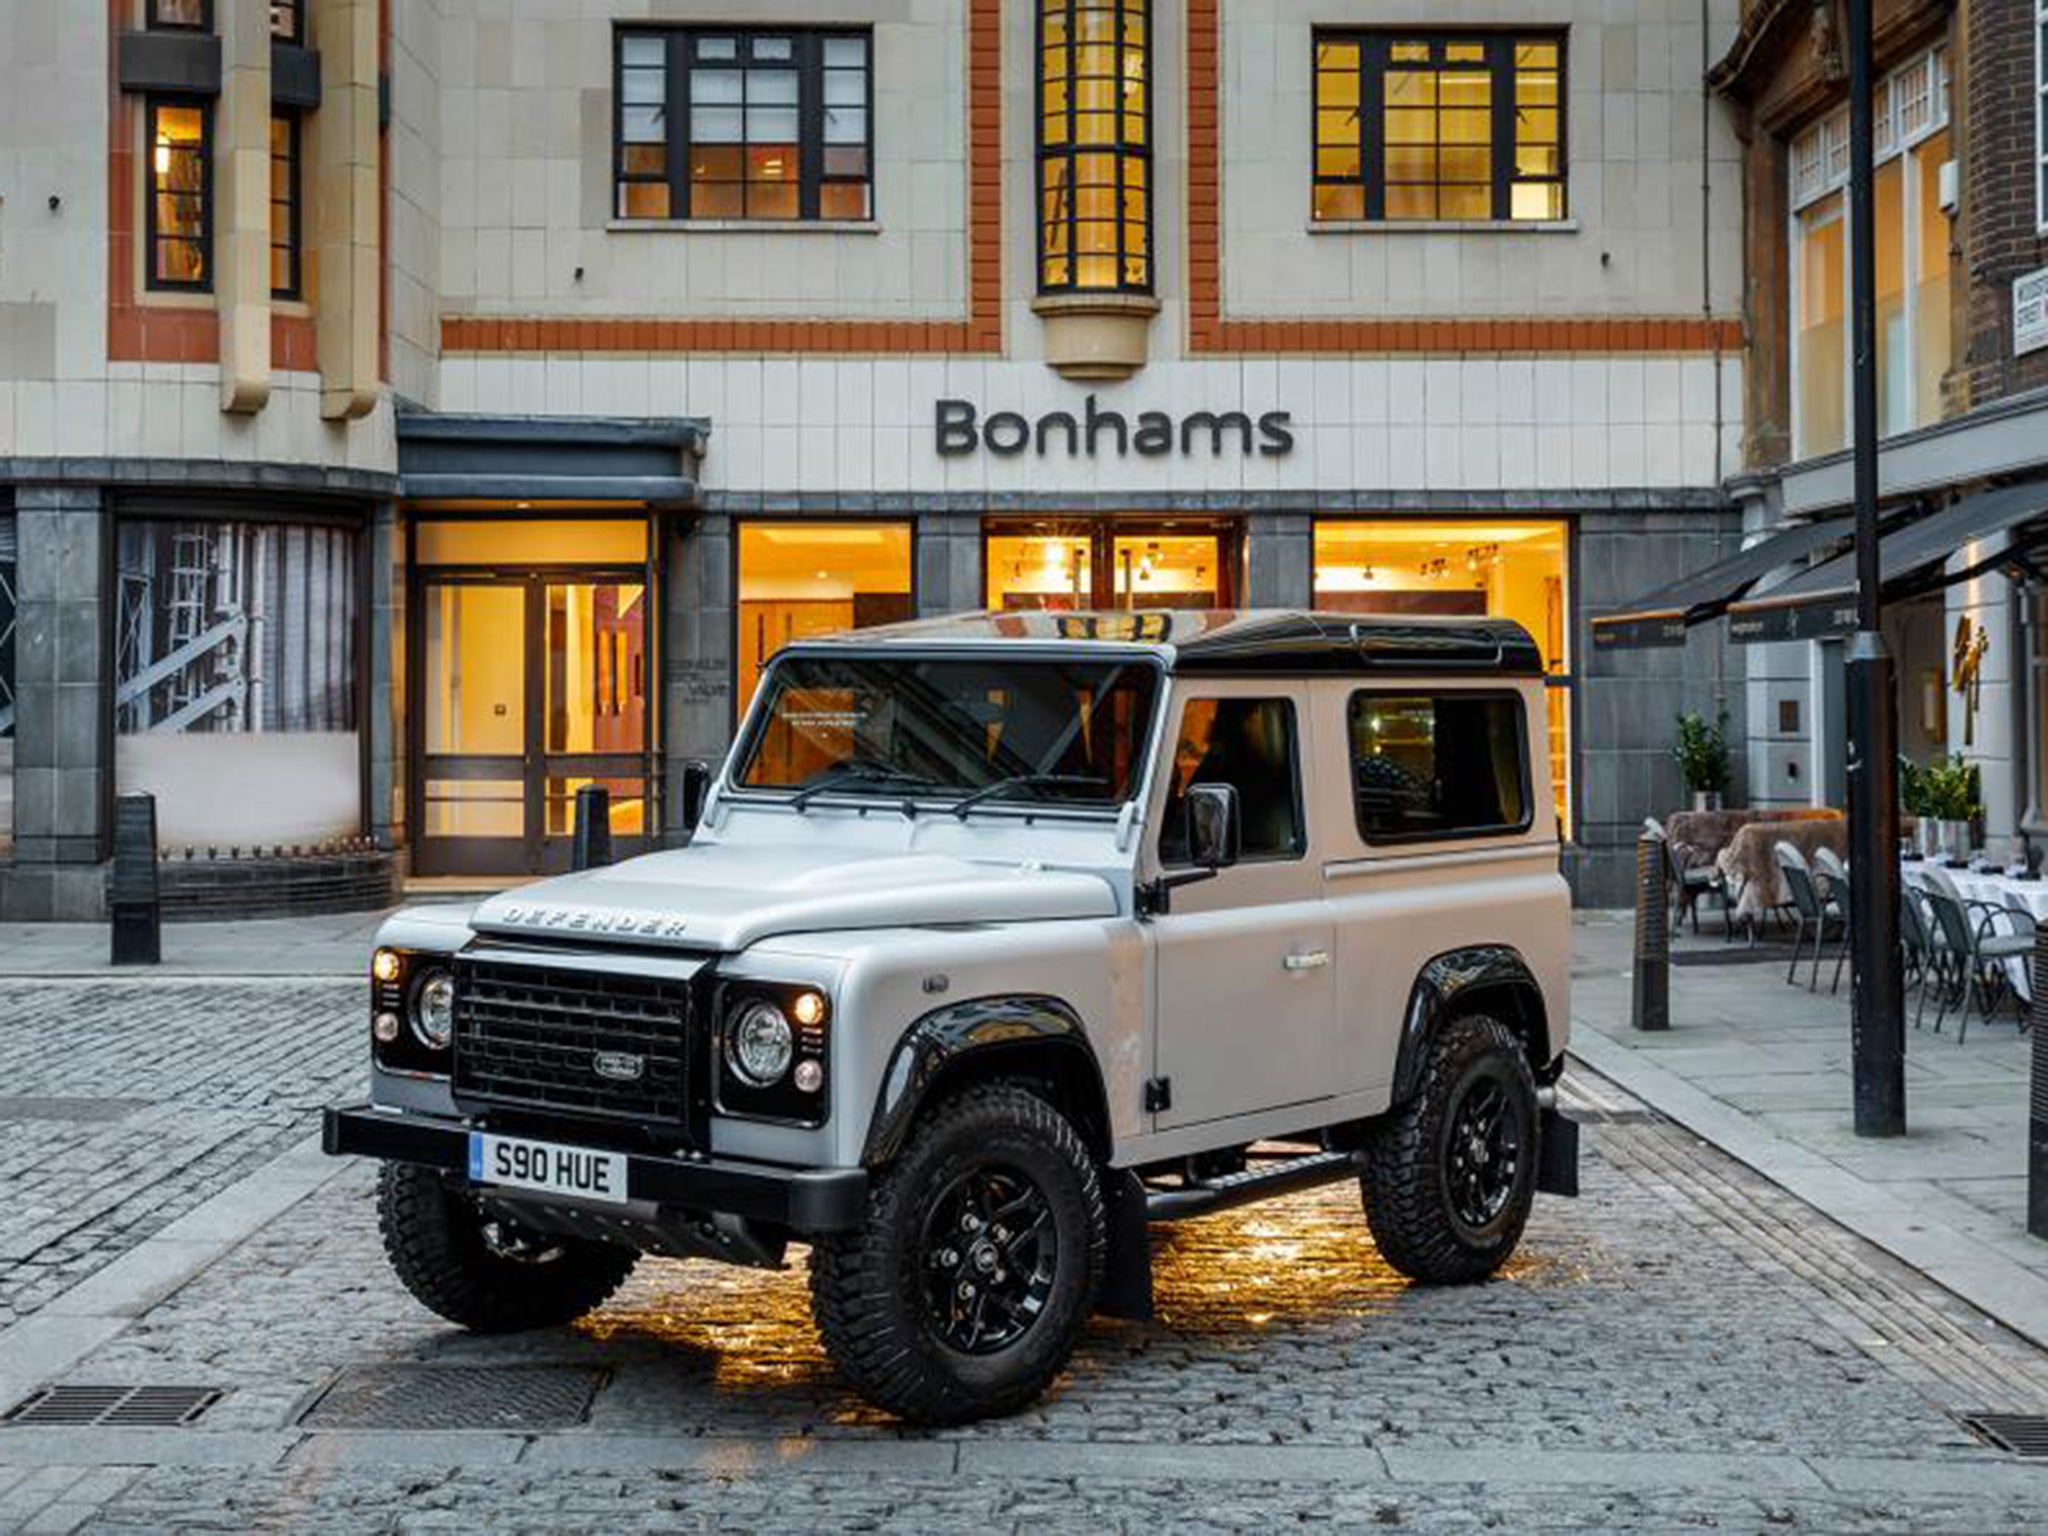 The Defender was built with the aid of various celebs and Land Rover brand ambassadors